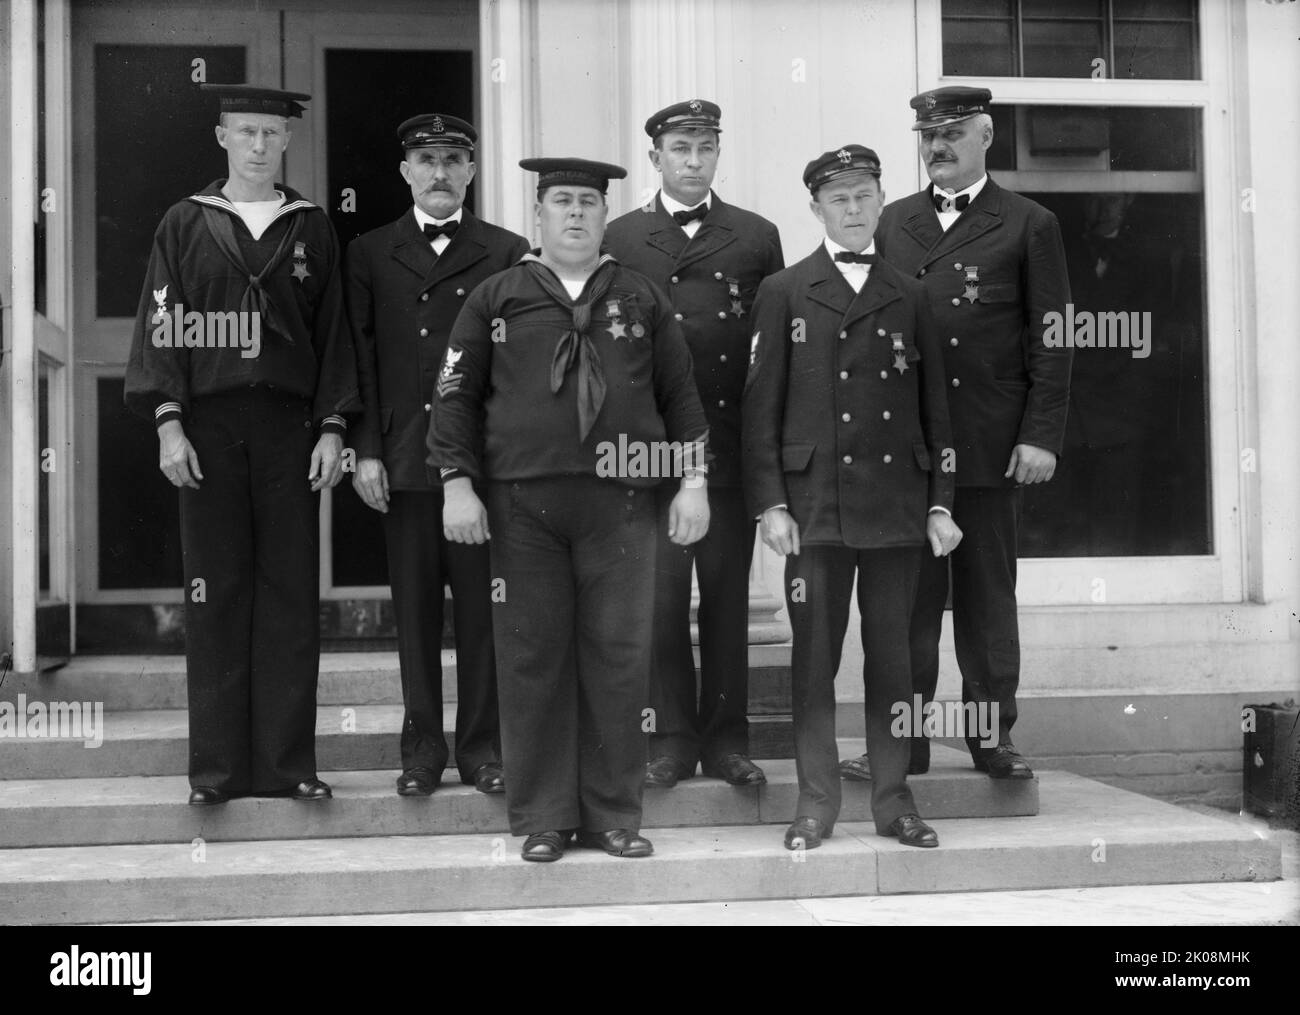 Honor Men of U.S. Navy; Groups, 1911. [Navy personnel, cap bands read: 'U.S.S. North Dakota'. USS North Dakota (BB-29) was a dreadnought battleship launched in November 1908]. Stock Photo